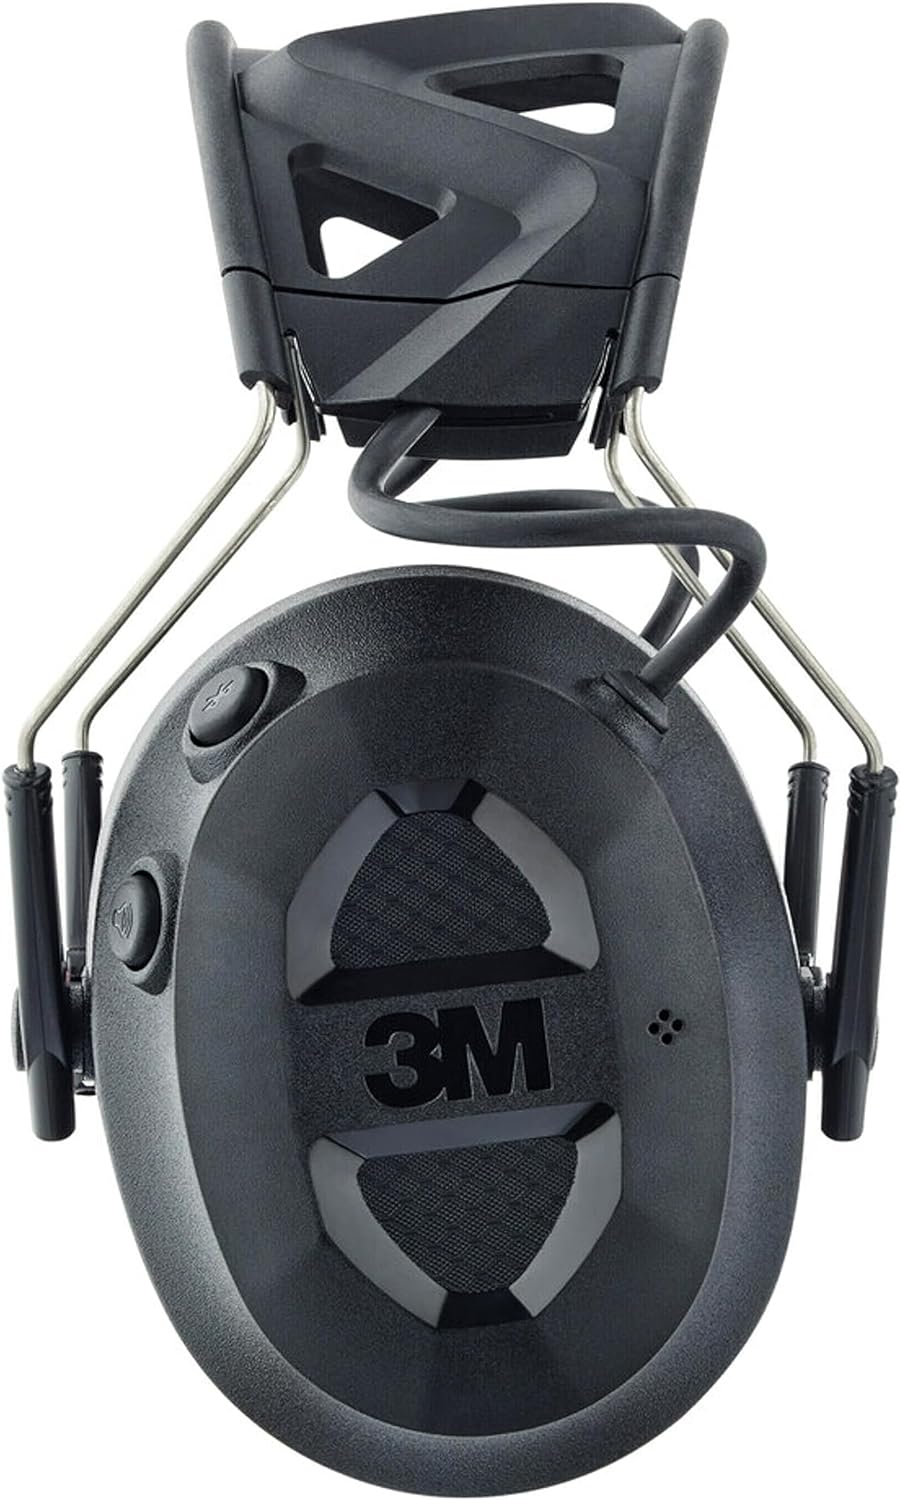 3M Pro-Protect + Gel Cushions Electronic Hearing Protector with Bluetooth Wireless Technology, NRR 26 dB, Black, Medium